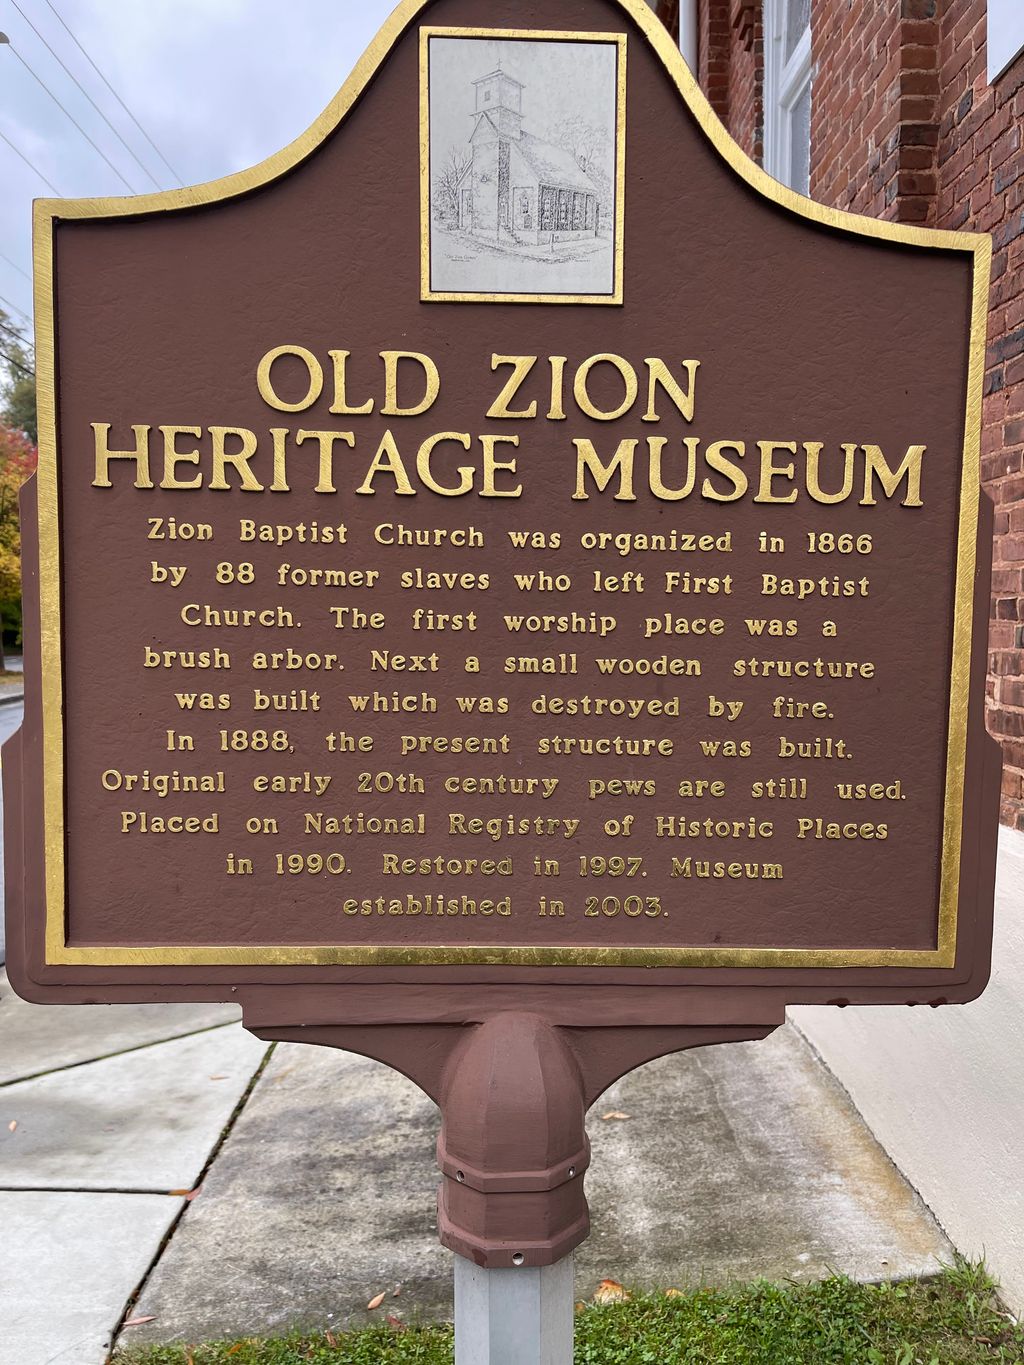 Old Zion Heritage Museum